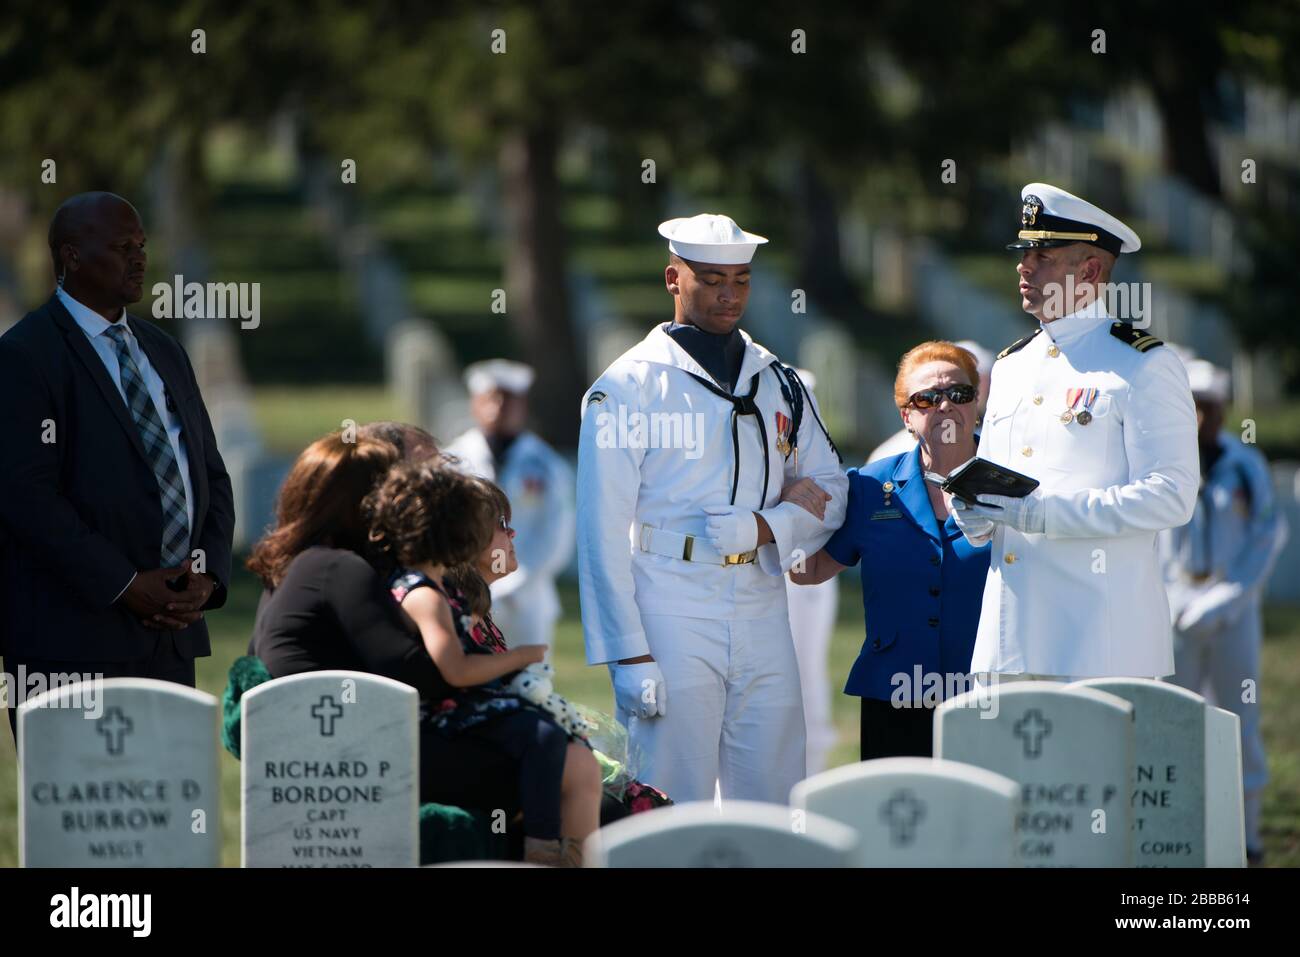 'U.S. Navy Chap. Lt. Chad Hoeppel, right, speaks during the graveside service for U.S. Navy Capt. Kent S. Webber in Section 60 of Arlington National Cemetery, Sept. 22, 2016, in Arlington, Va. (U.S. Army photo by Rachel Larue/Arlington National Cemetery/released); 22 September 2016, 13:54; Graveside service for U.S. Navy Capt. Kent S. Webber; Arlington National Cemetery; ' Stock Photo